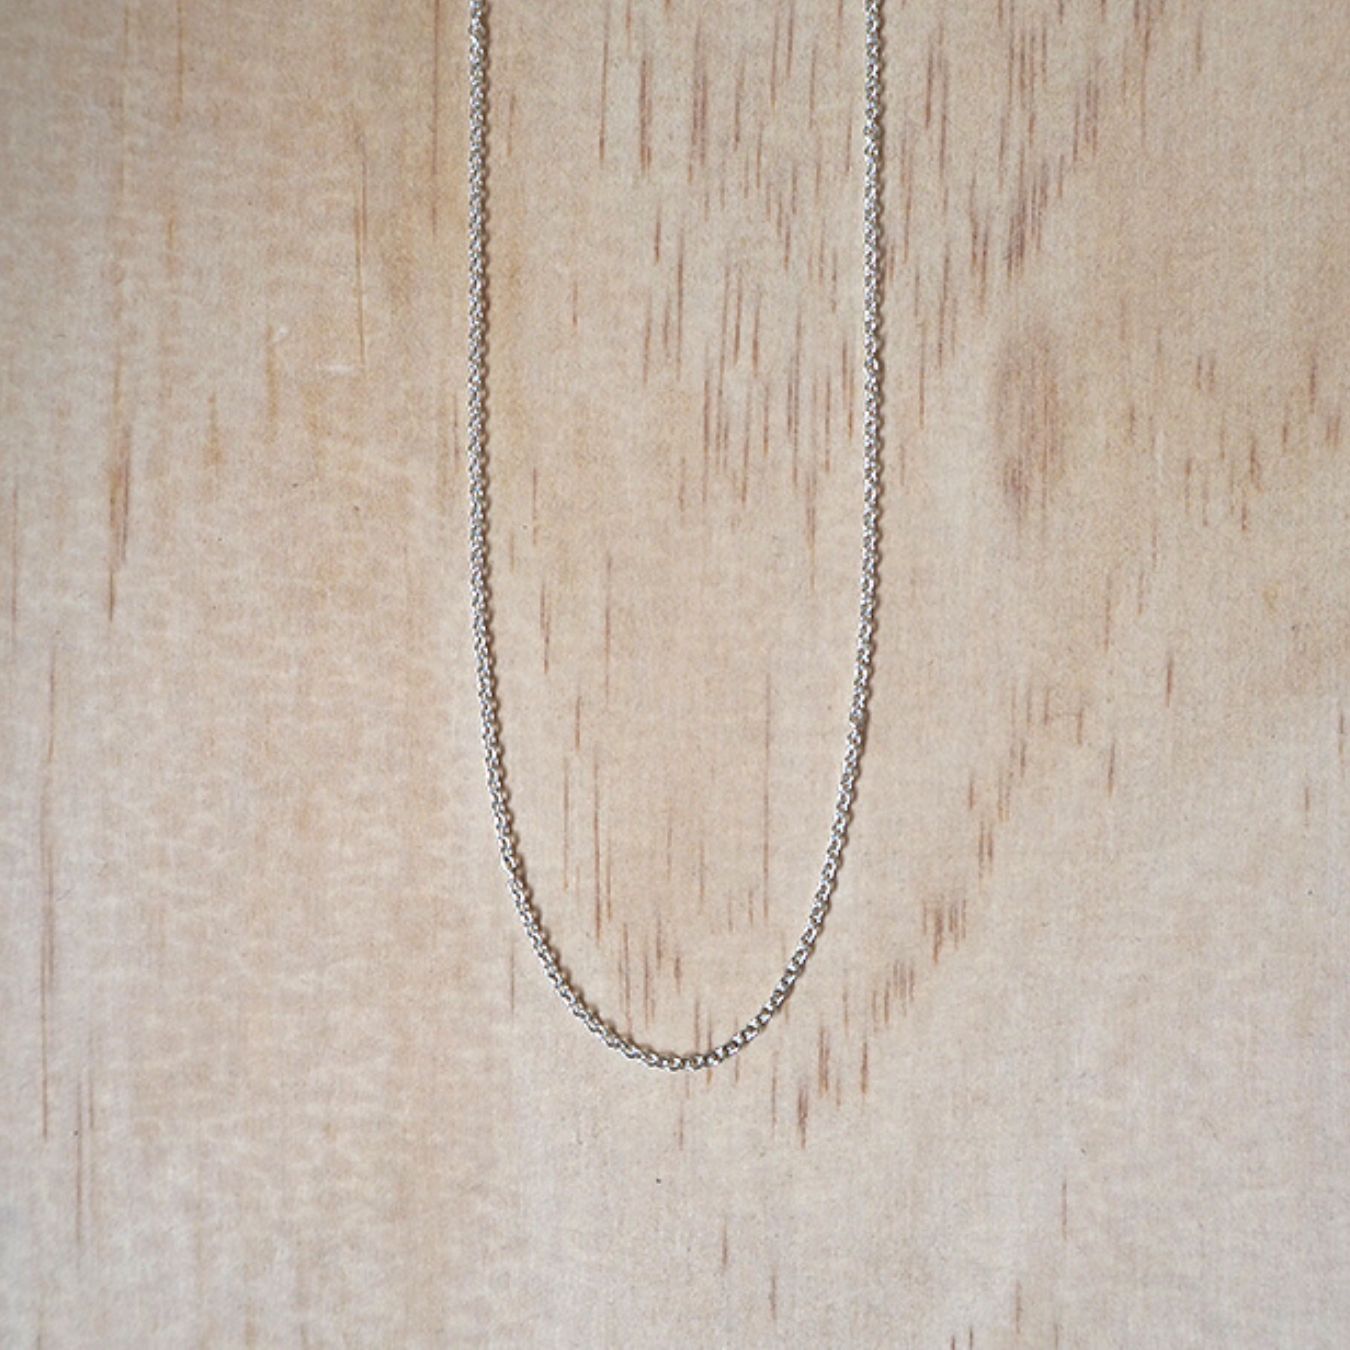 Plain Chain Necklace - Sterling Silver